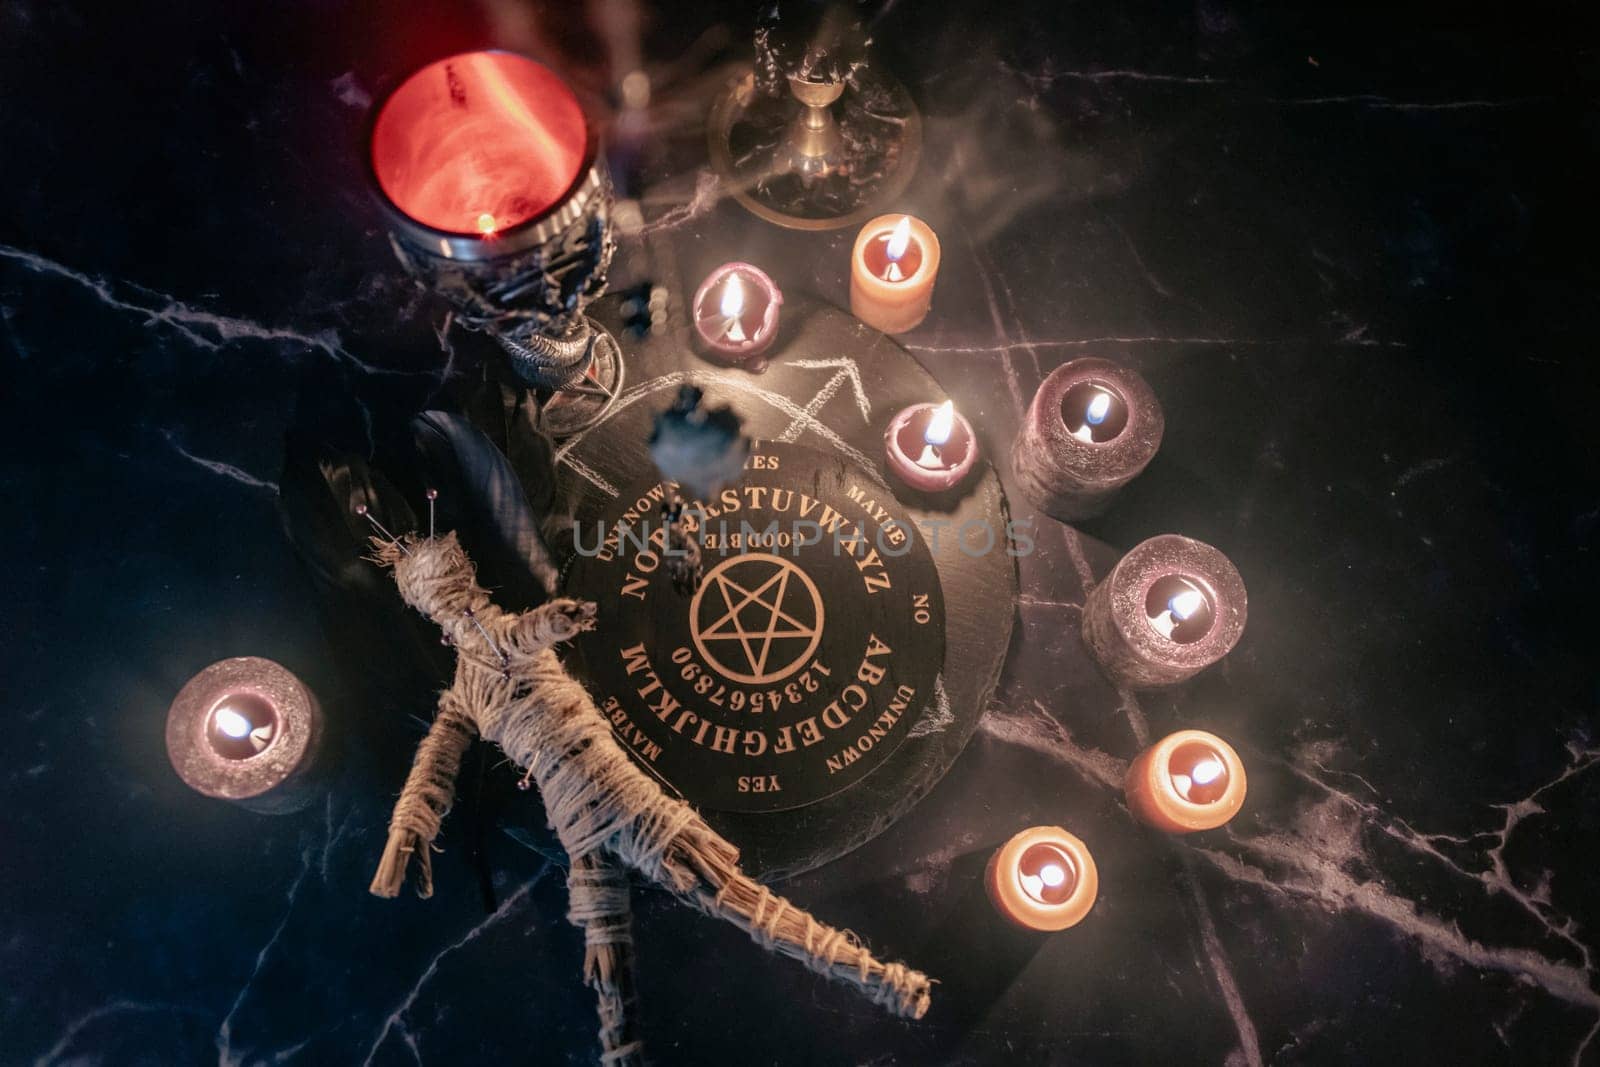 A chilling scene of an occult ritual featuring a voodoo doll pinned with needles, surrounded by candles, a pentagram, and eerie smoke. by jbruiz78